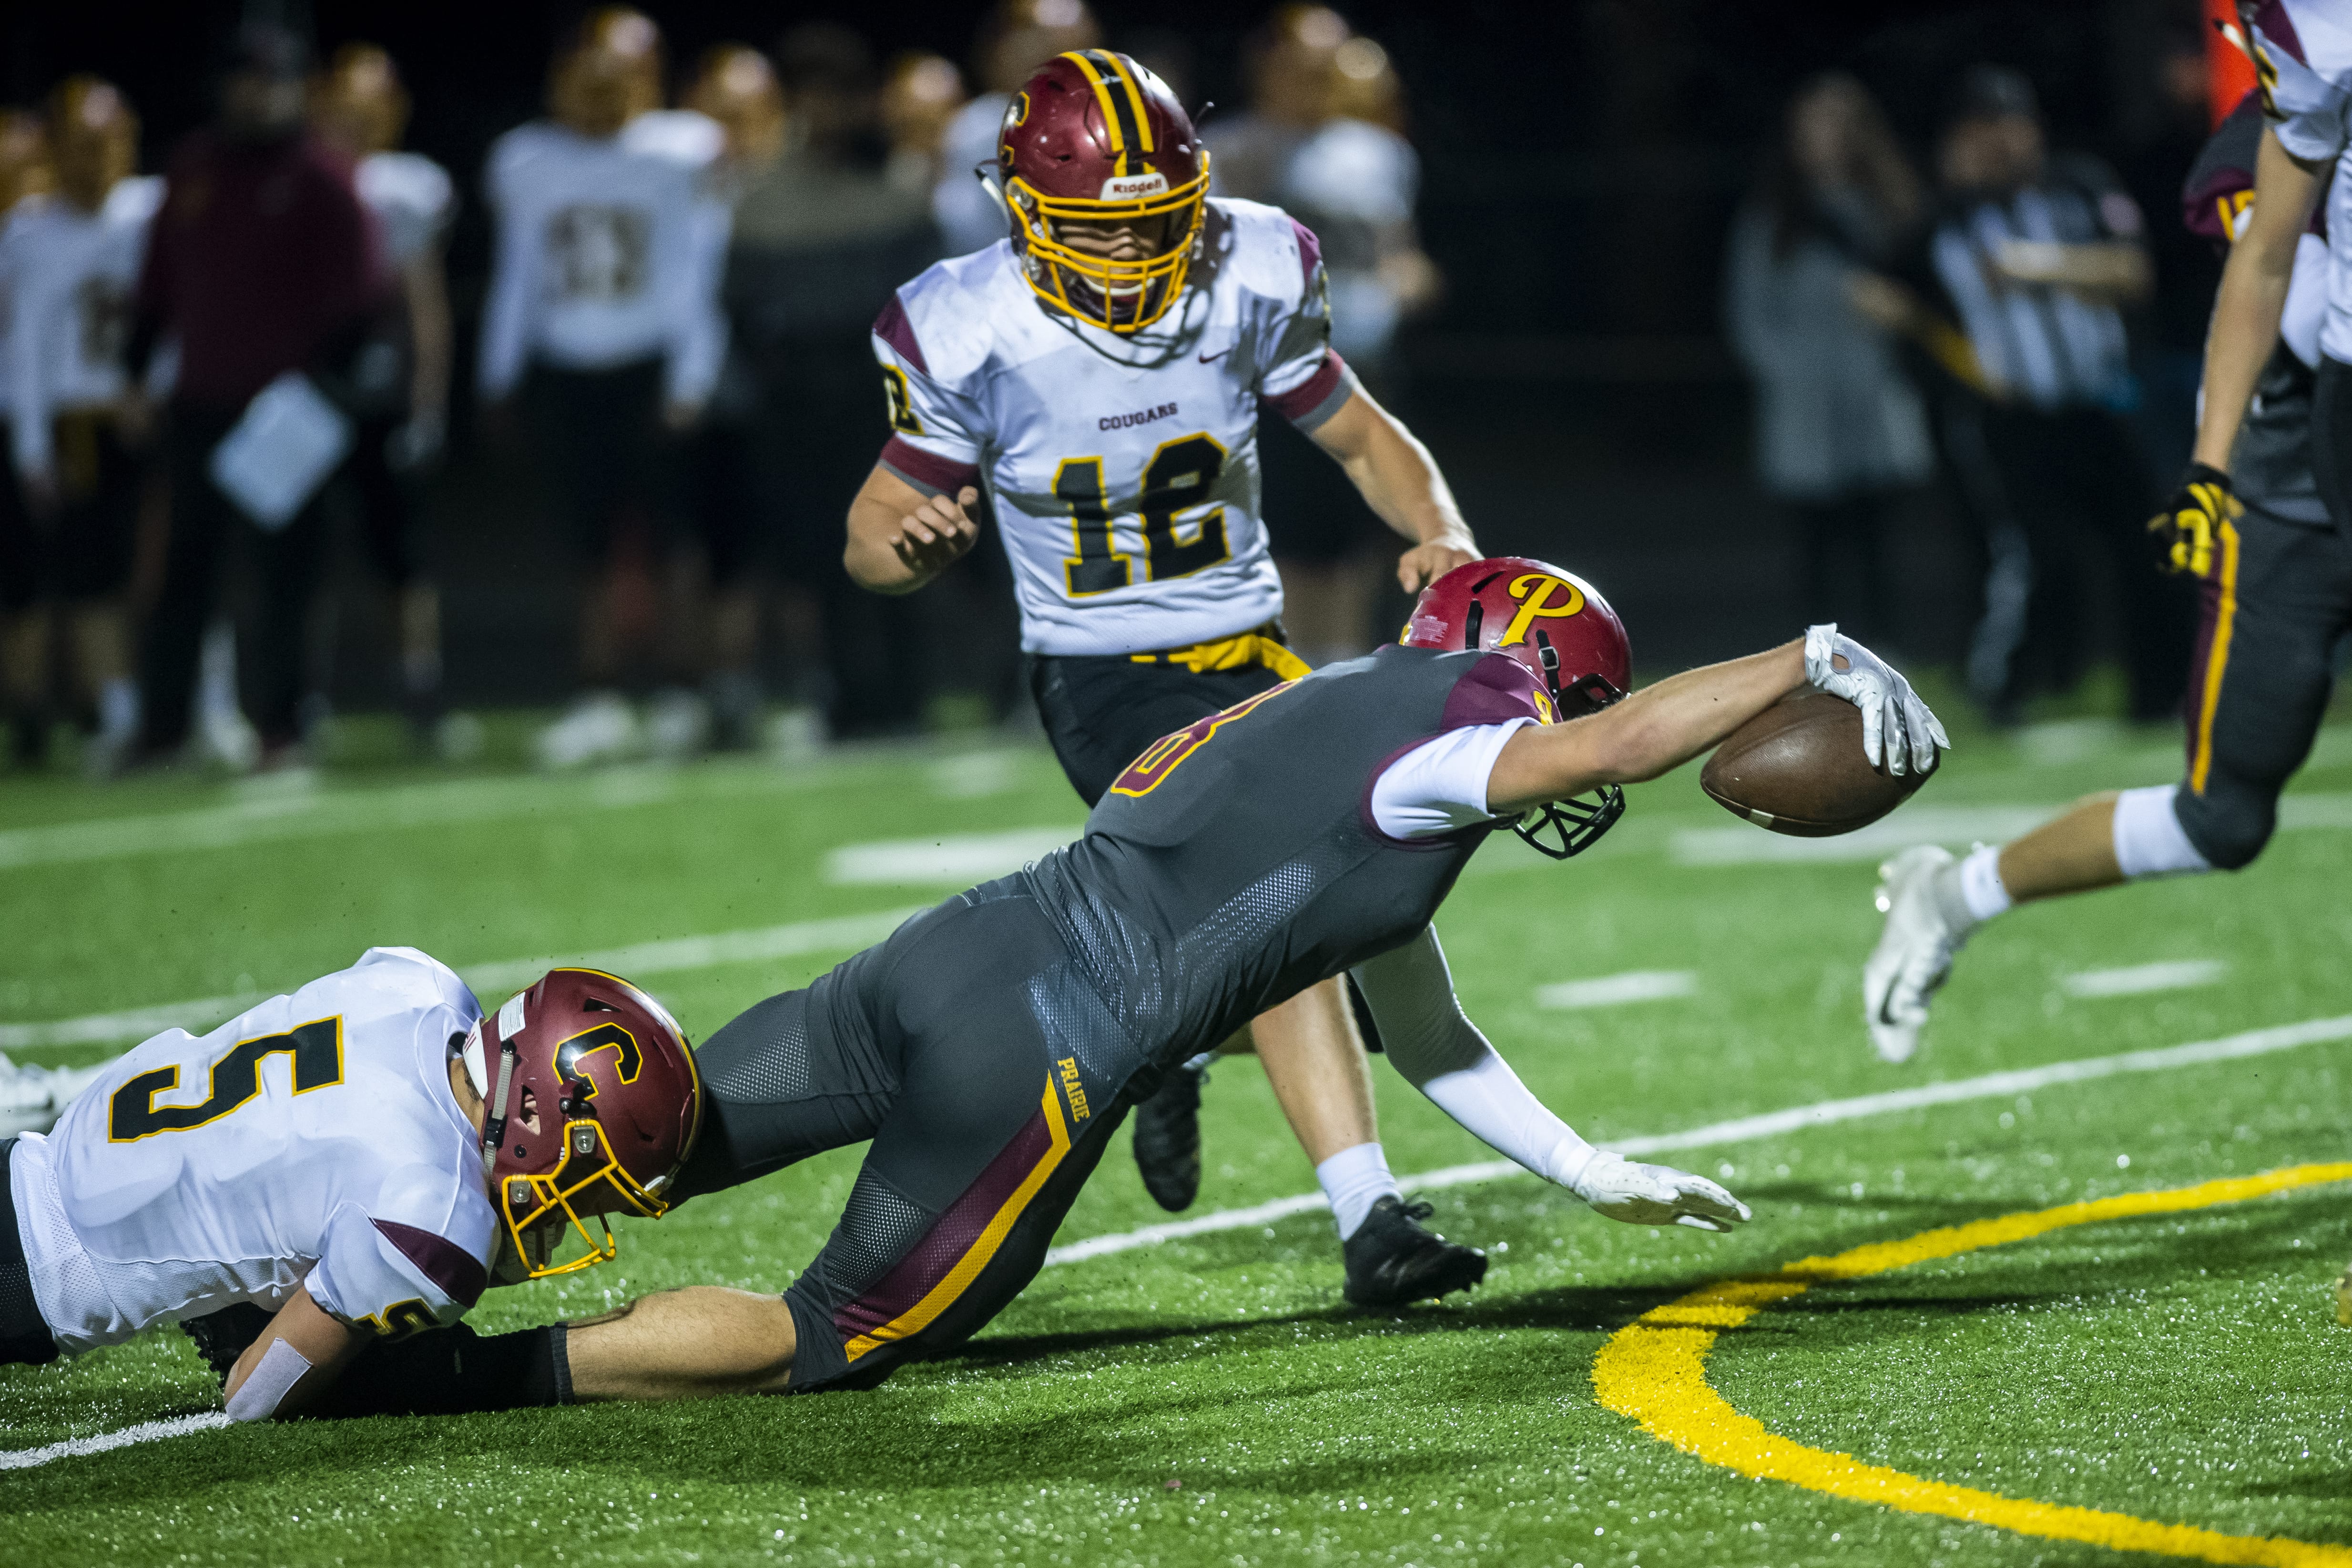 Prairie’s Jamien Farrell reaches for extra yards while being brought down by a Capital defender during a game at Battle Ground District Stadium on Friday night, Nov. 8, 2019.